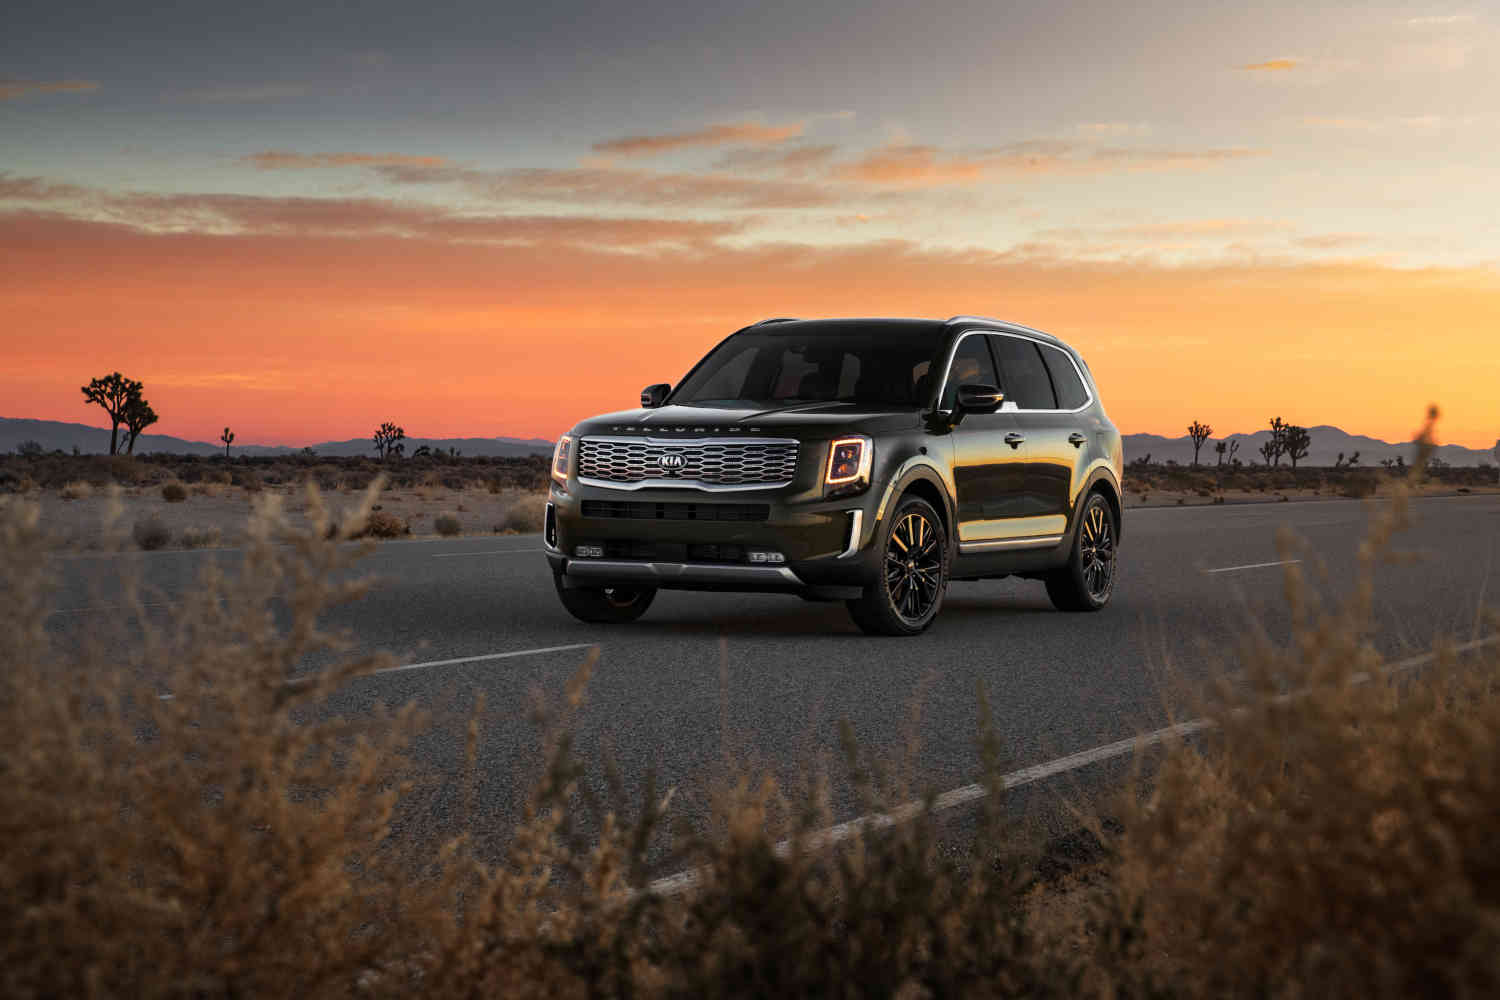 The first Kia Telluride from 2020